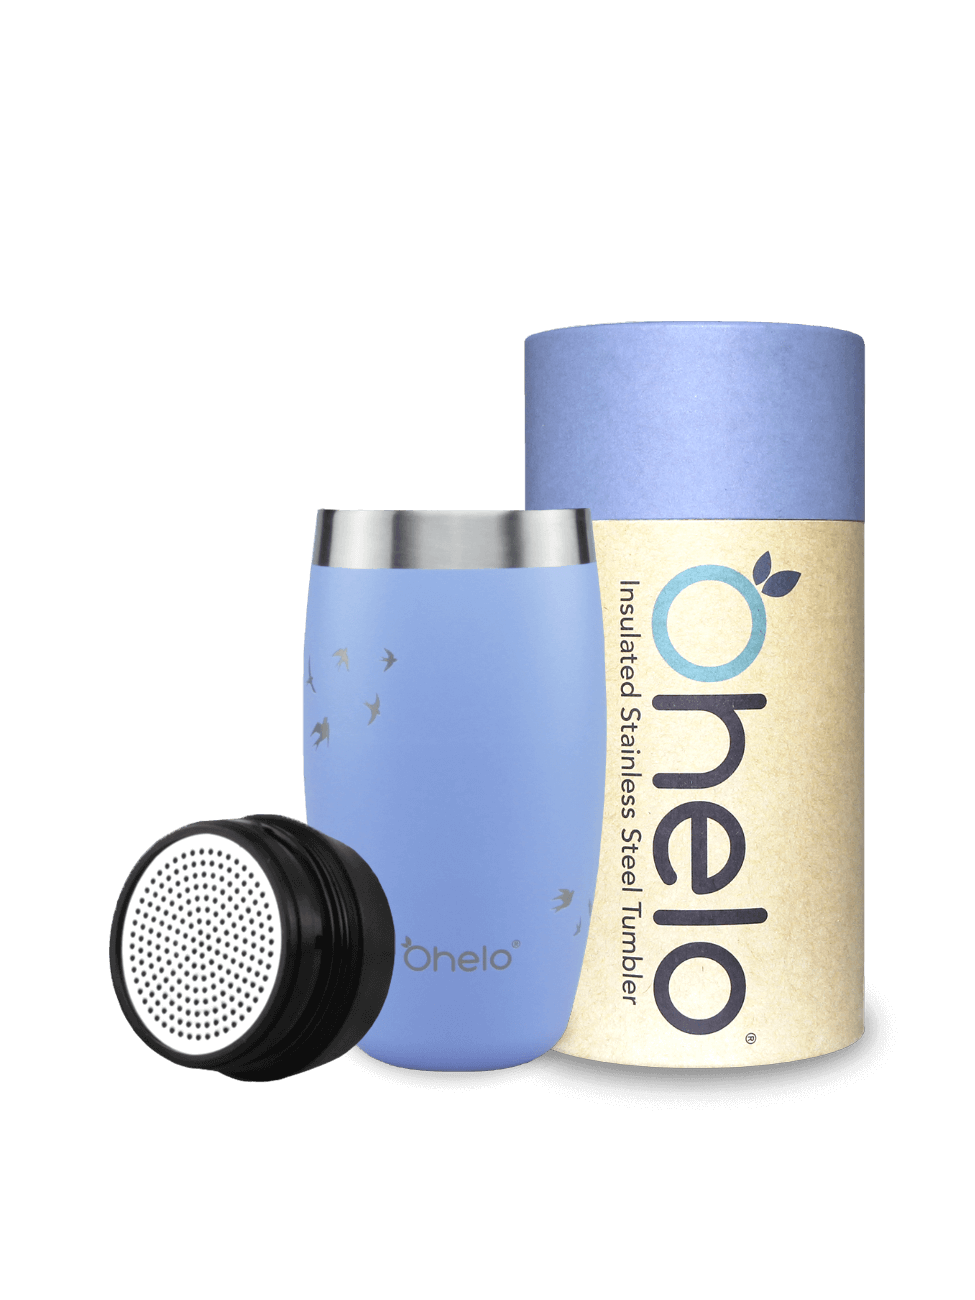 Ohelo BPA free insulated tumbler in blue with swallow bird design, pictured with recycled packaging